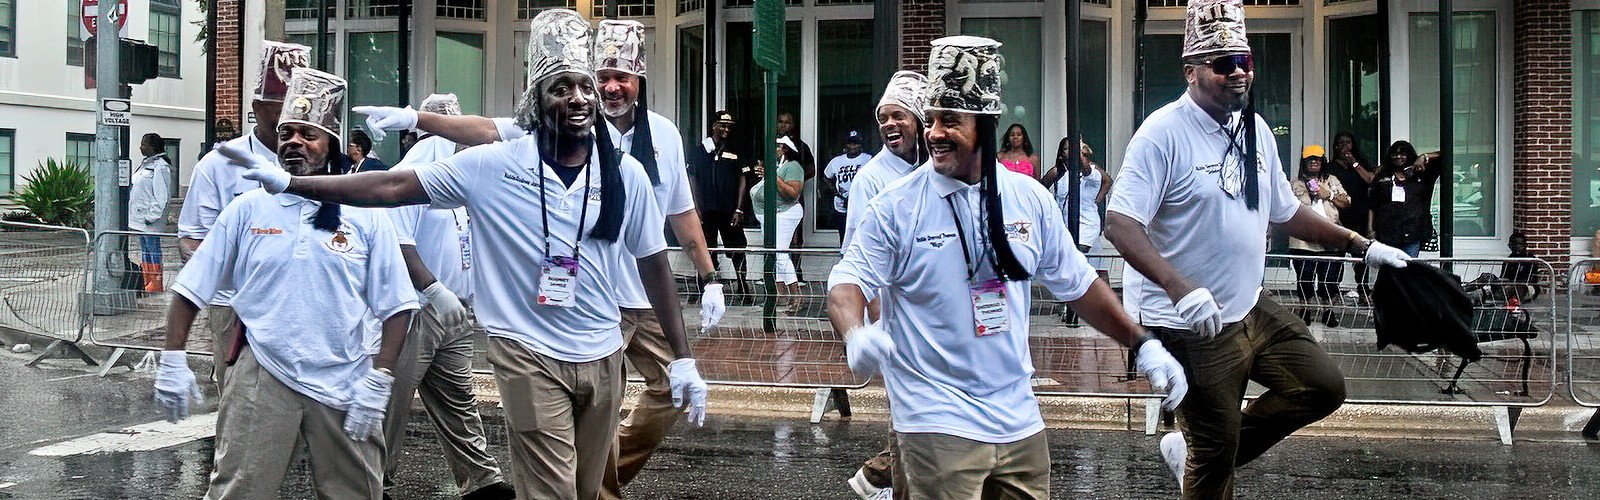 With their red fezes covered for the rain, members of the MISR 213 Marching Club from Accokeek, MD enjoy themselves as they parade with style, embodying the organization philosophy of   having fun while serving.